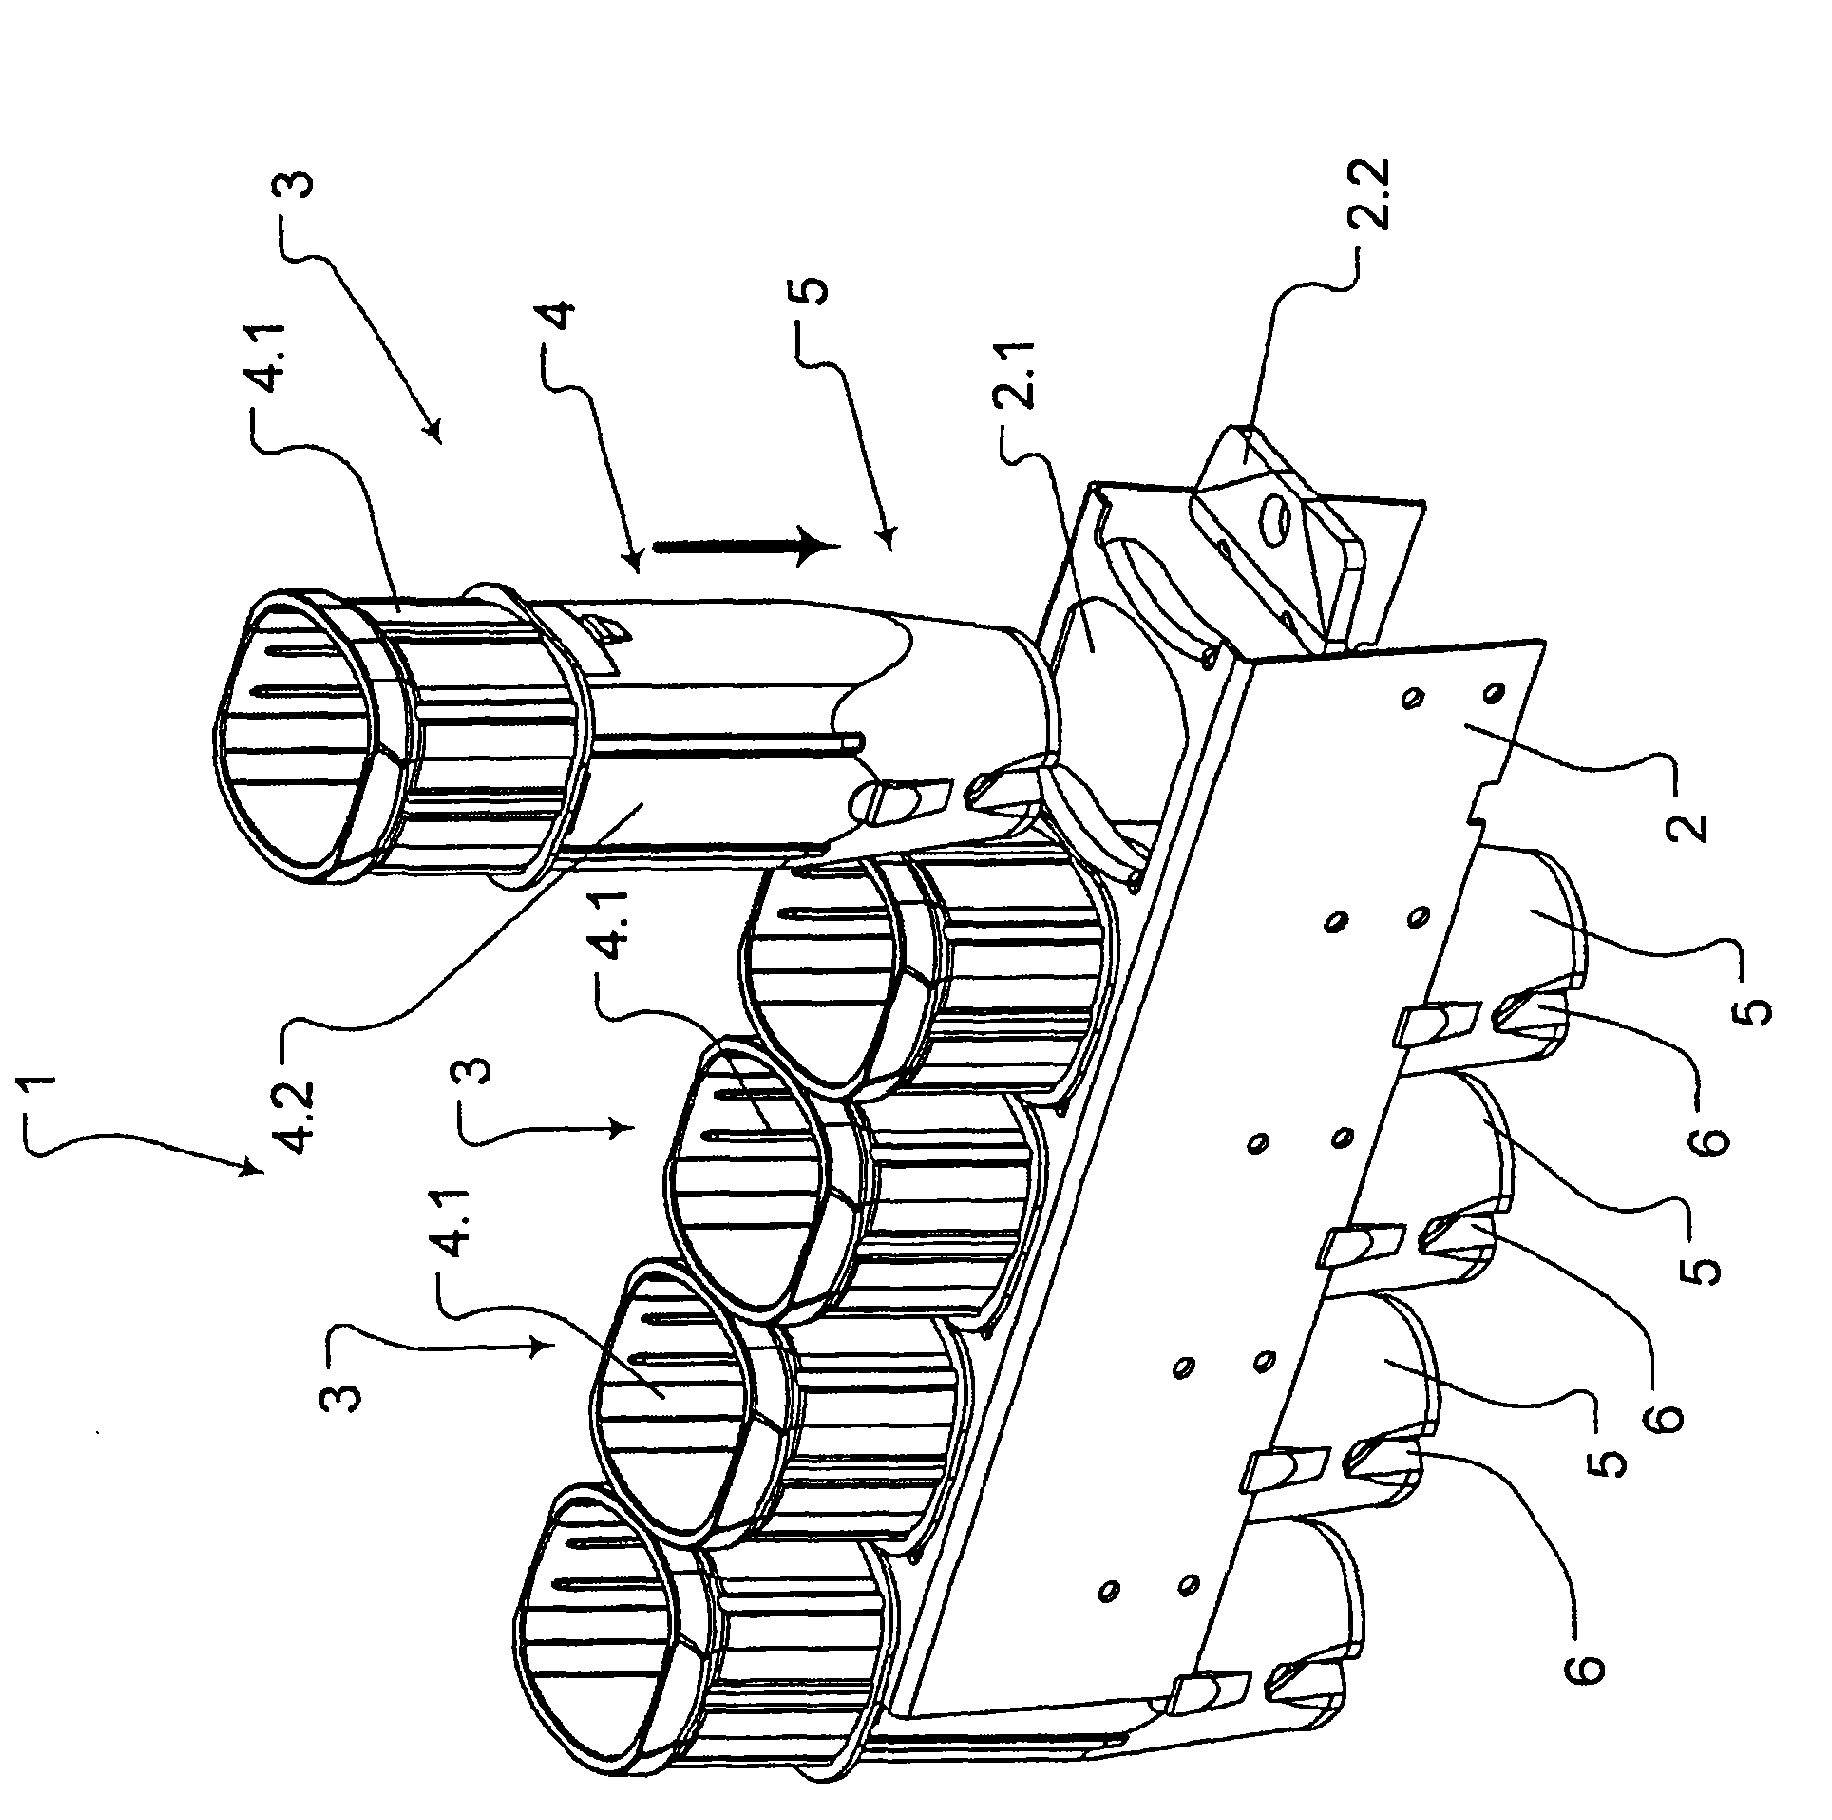 Container cell, in particular bottle cell, and container rack having such container cells